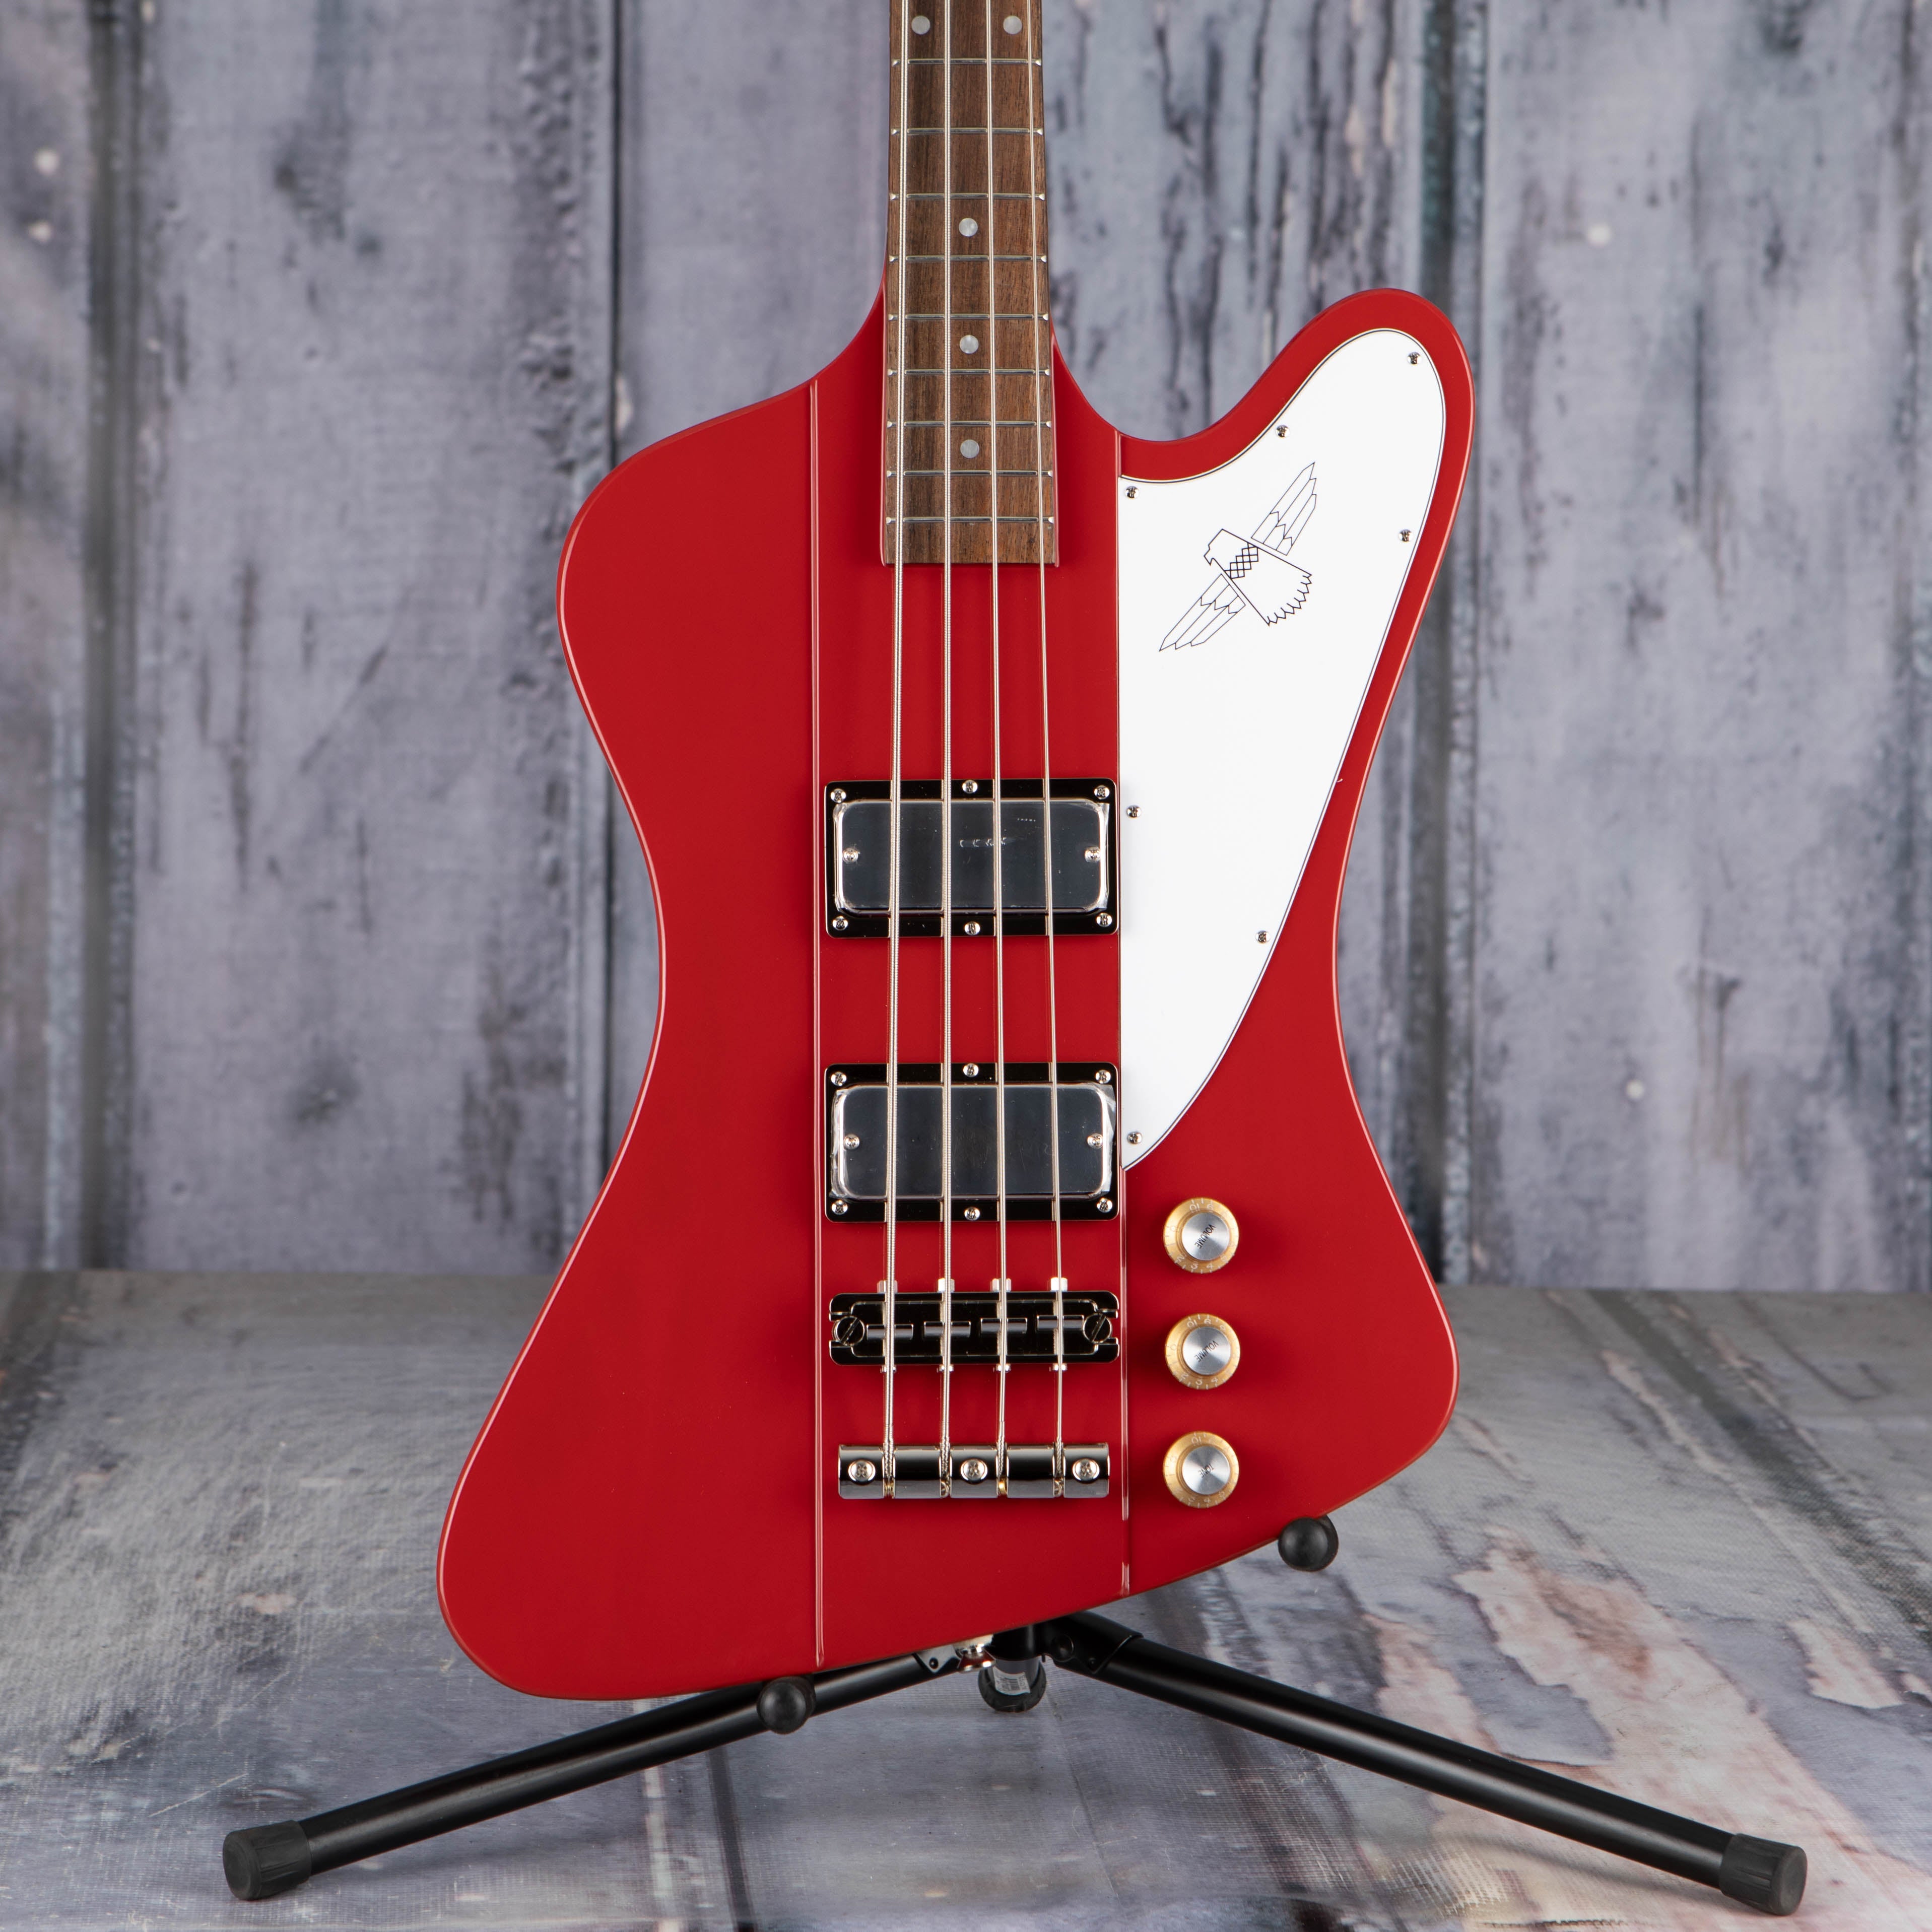 Epiphone Thunderbird '64 Bass, Ember Red | For Sale | Replay 